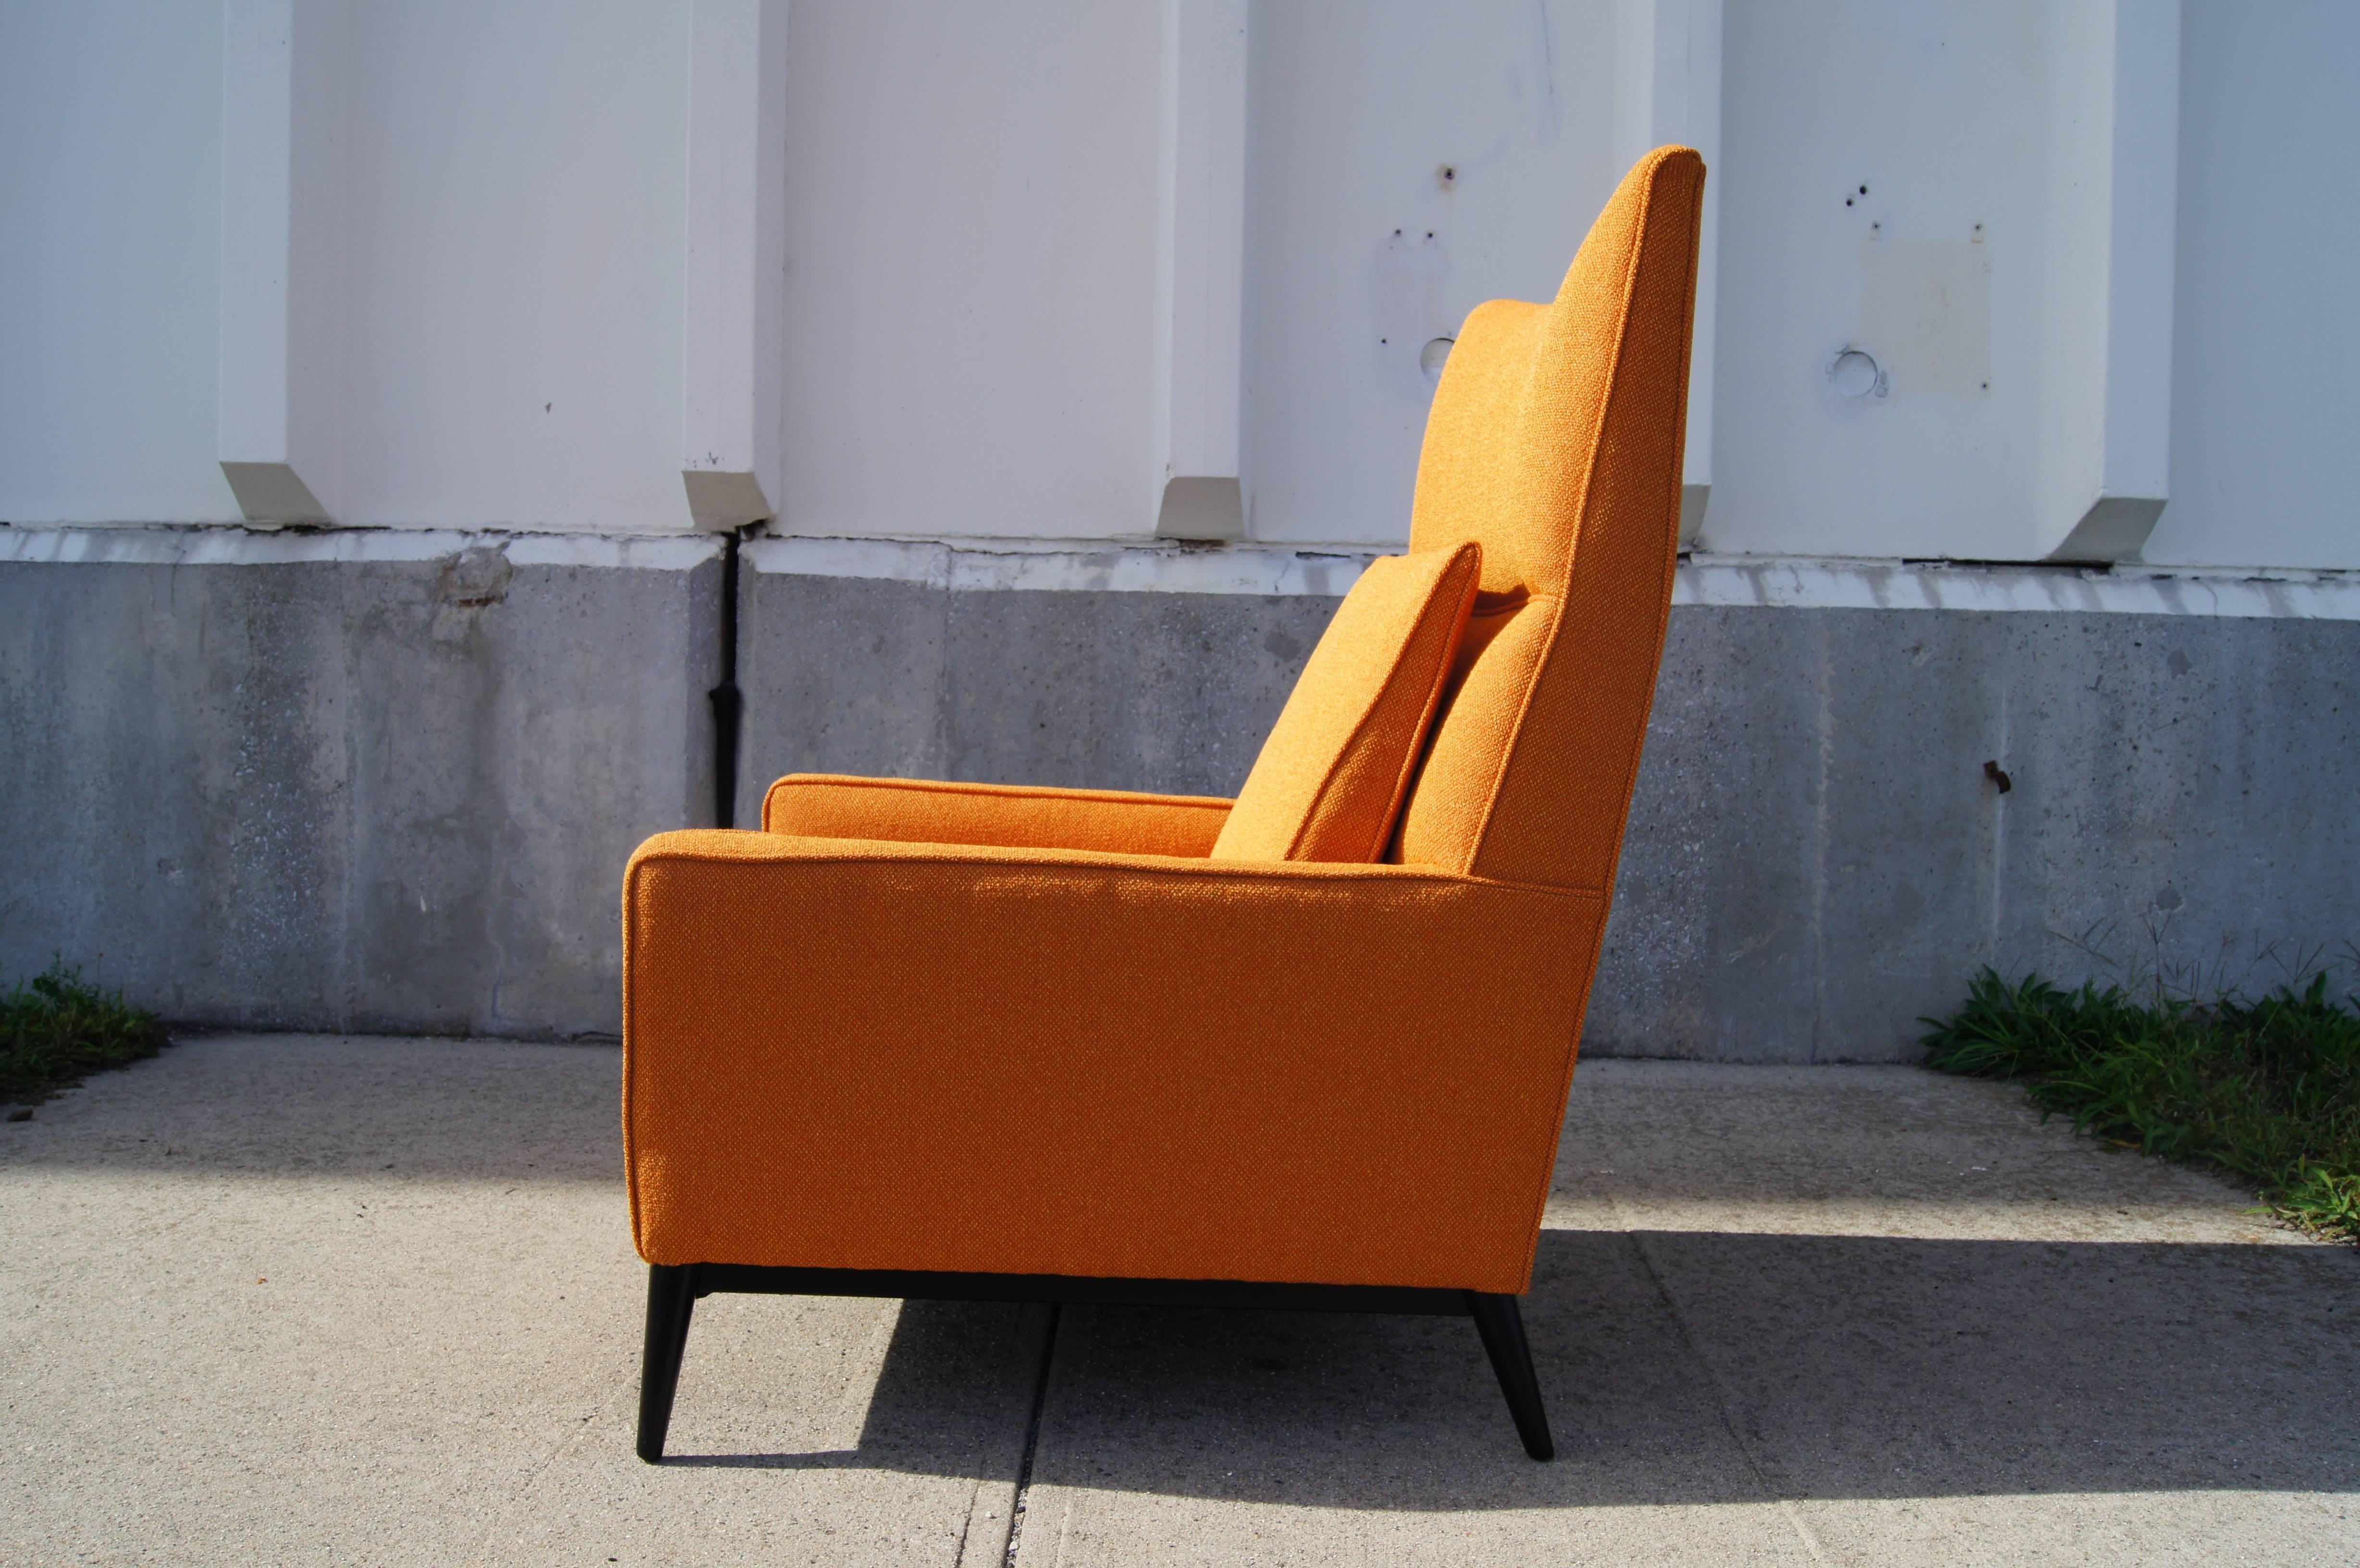 Paul McCobb designed this comfortable high-back lounge chair, model 314, for Directional Furniture. Its pointed wings, splayed tapering legs and wedge-shaped back cushion create a distinctive play of angles.

The chair has been reupholstered in